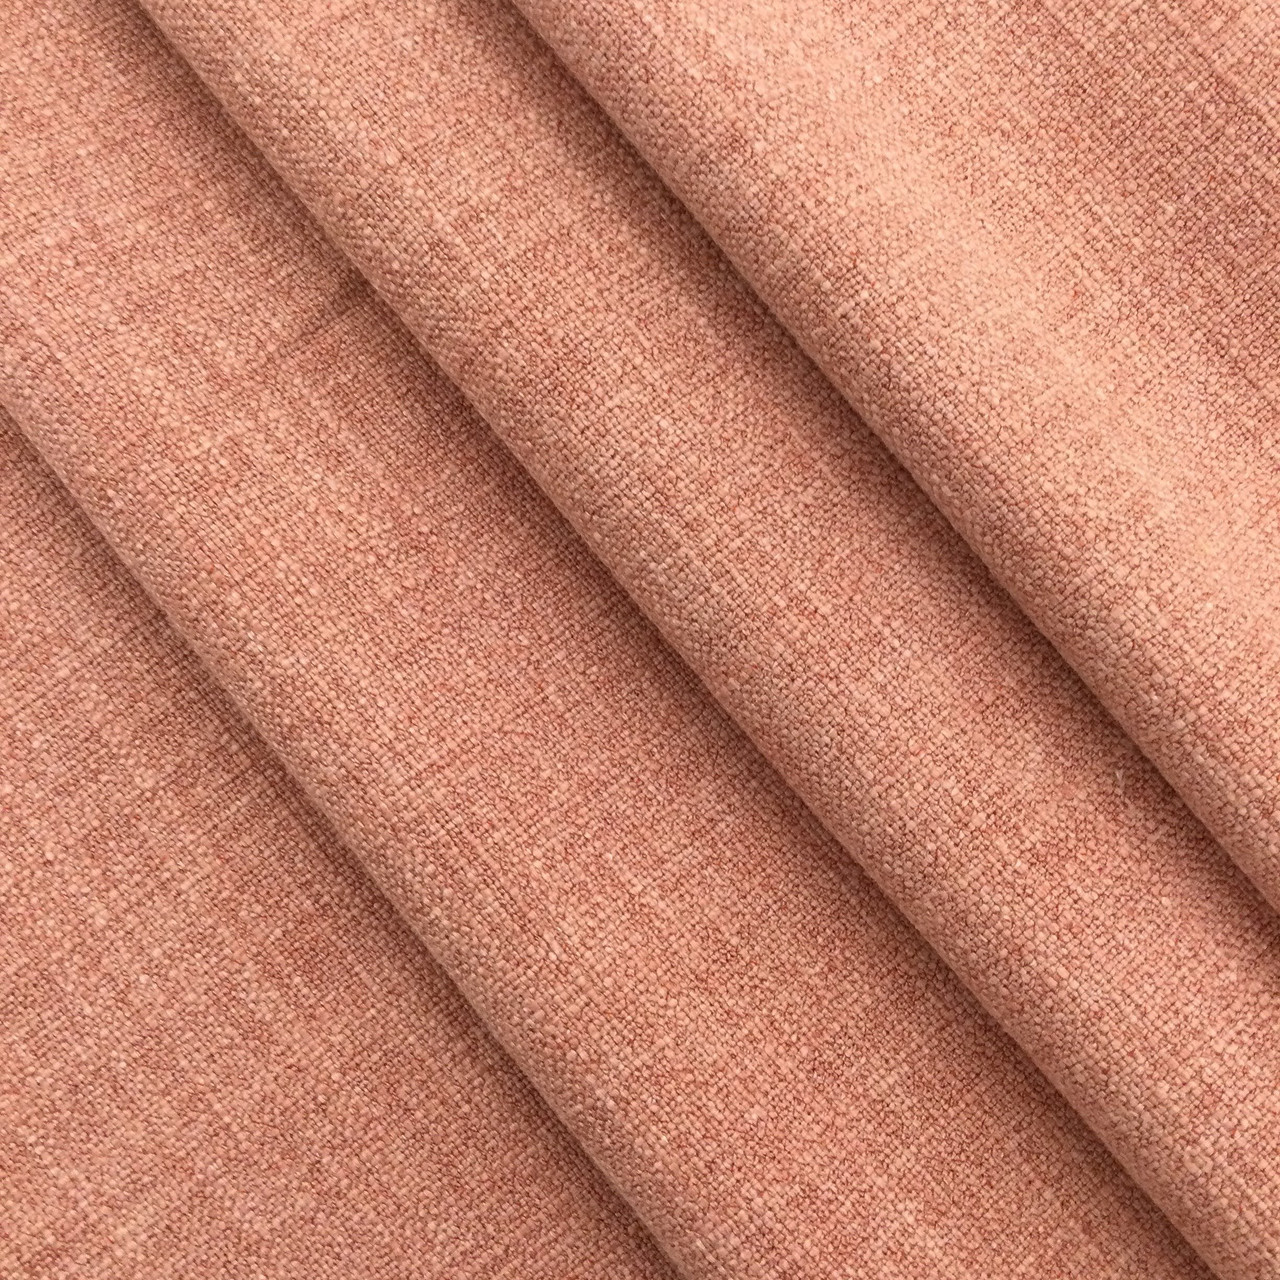 Cotton Polyester Blend Blush Pink Fabric remnant-180cmx180cm Material  Fashion Upholstery Vintage Design Clothing Textile -  Canada